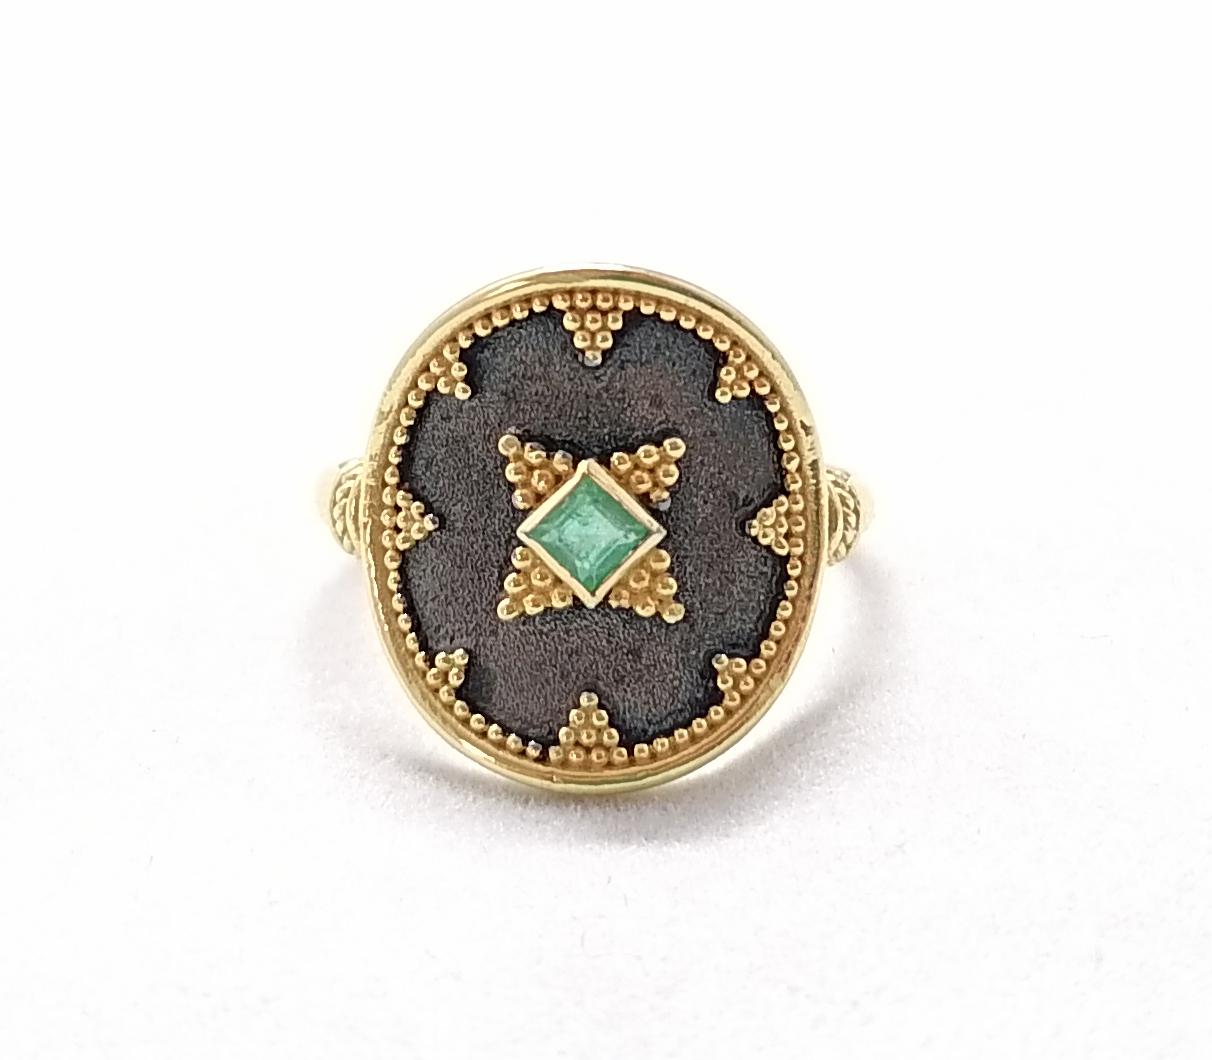 This S.Georgios designer two-tone stunning ring is handmade from solid 18 Karat Yellow Gold and is microscopically decorated with Byzantine-style granulation work. This beautiful ring features an elegant center Princess cut natural Emerald total